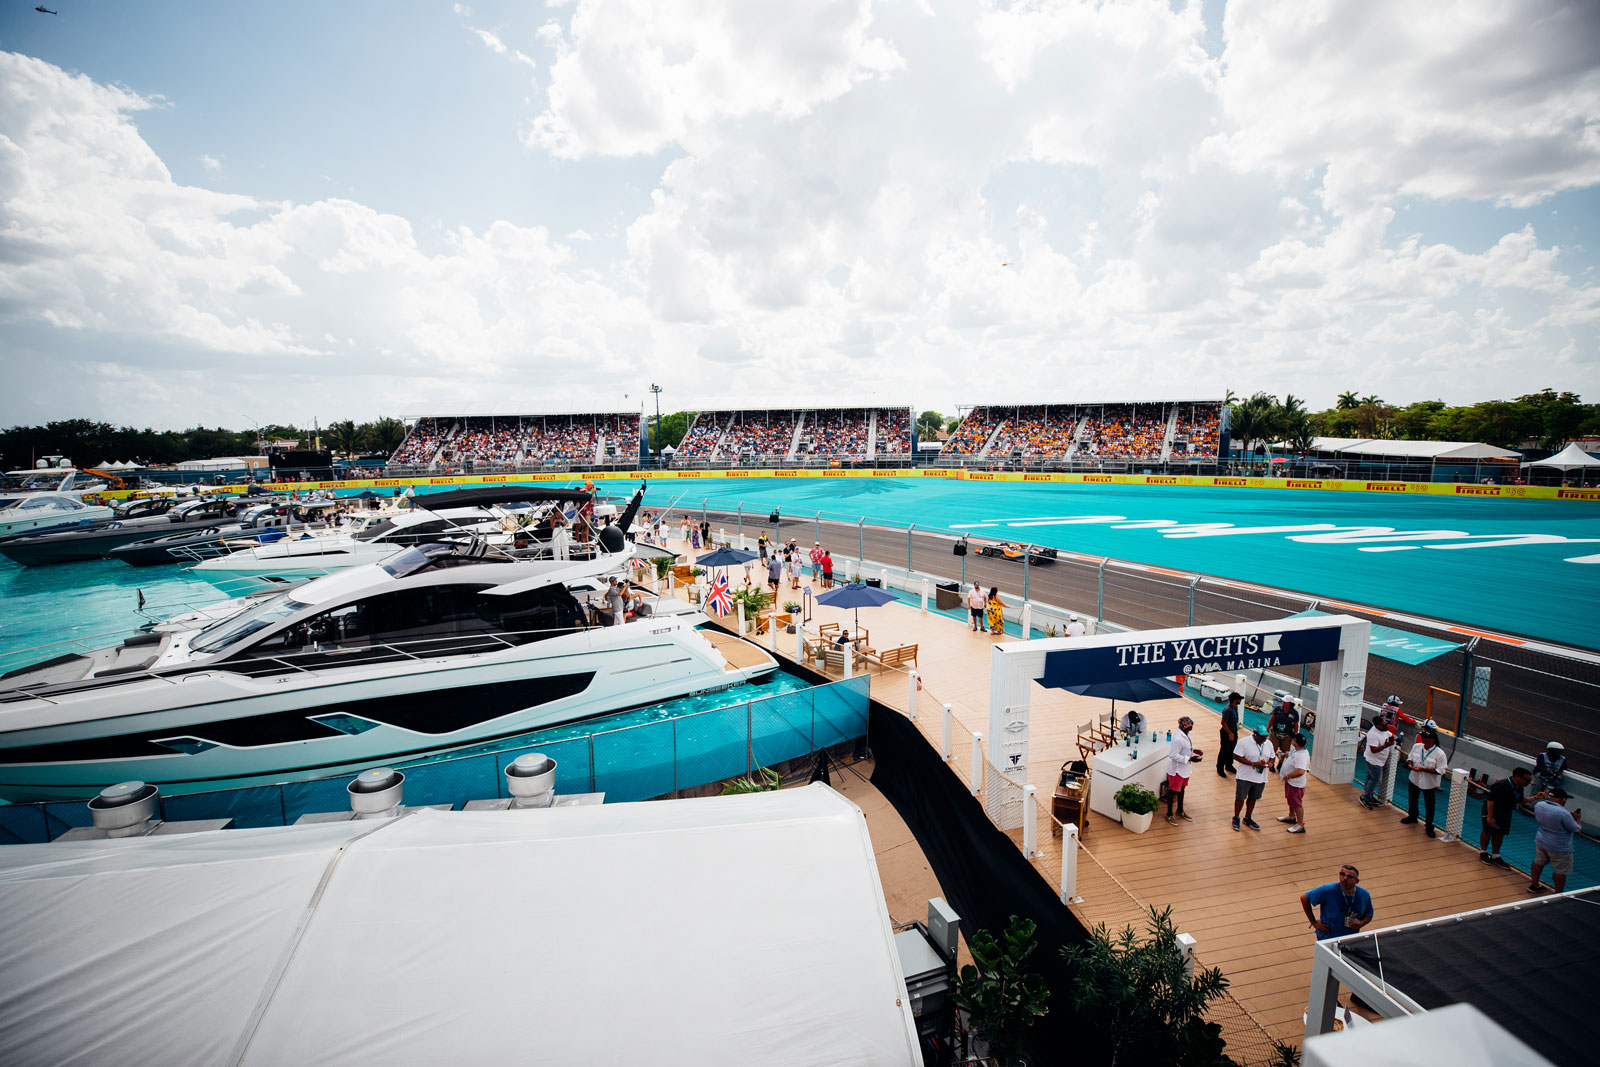 Located in the Marina at Miami International Autodrome, The Yachts offer the most exclusive luxury experience at the Miami Grand Prix.